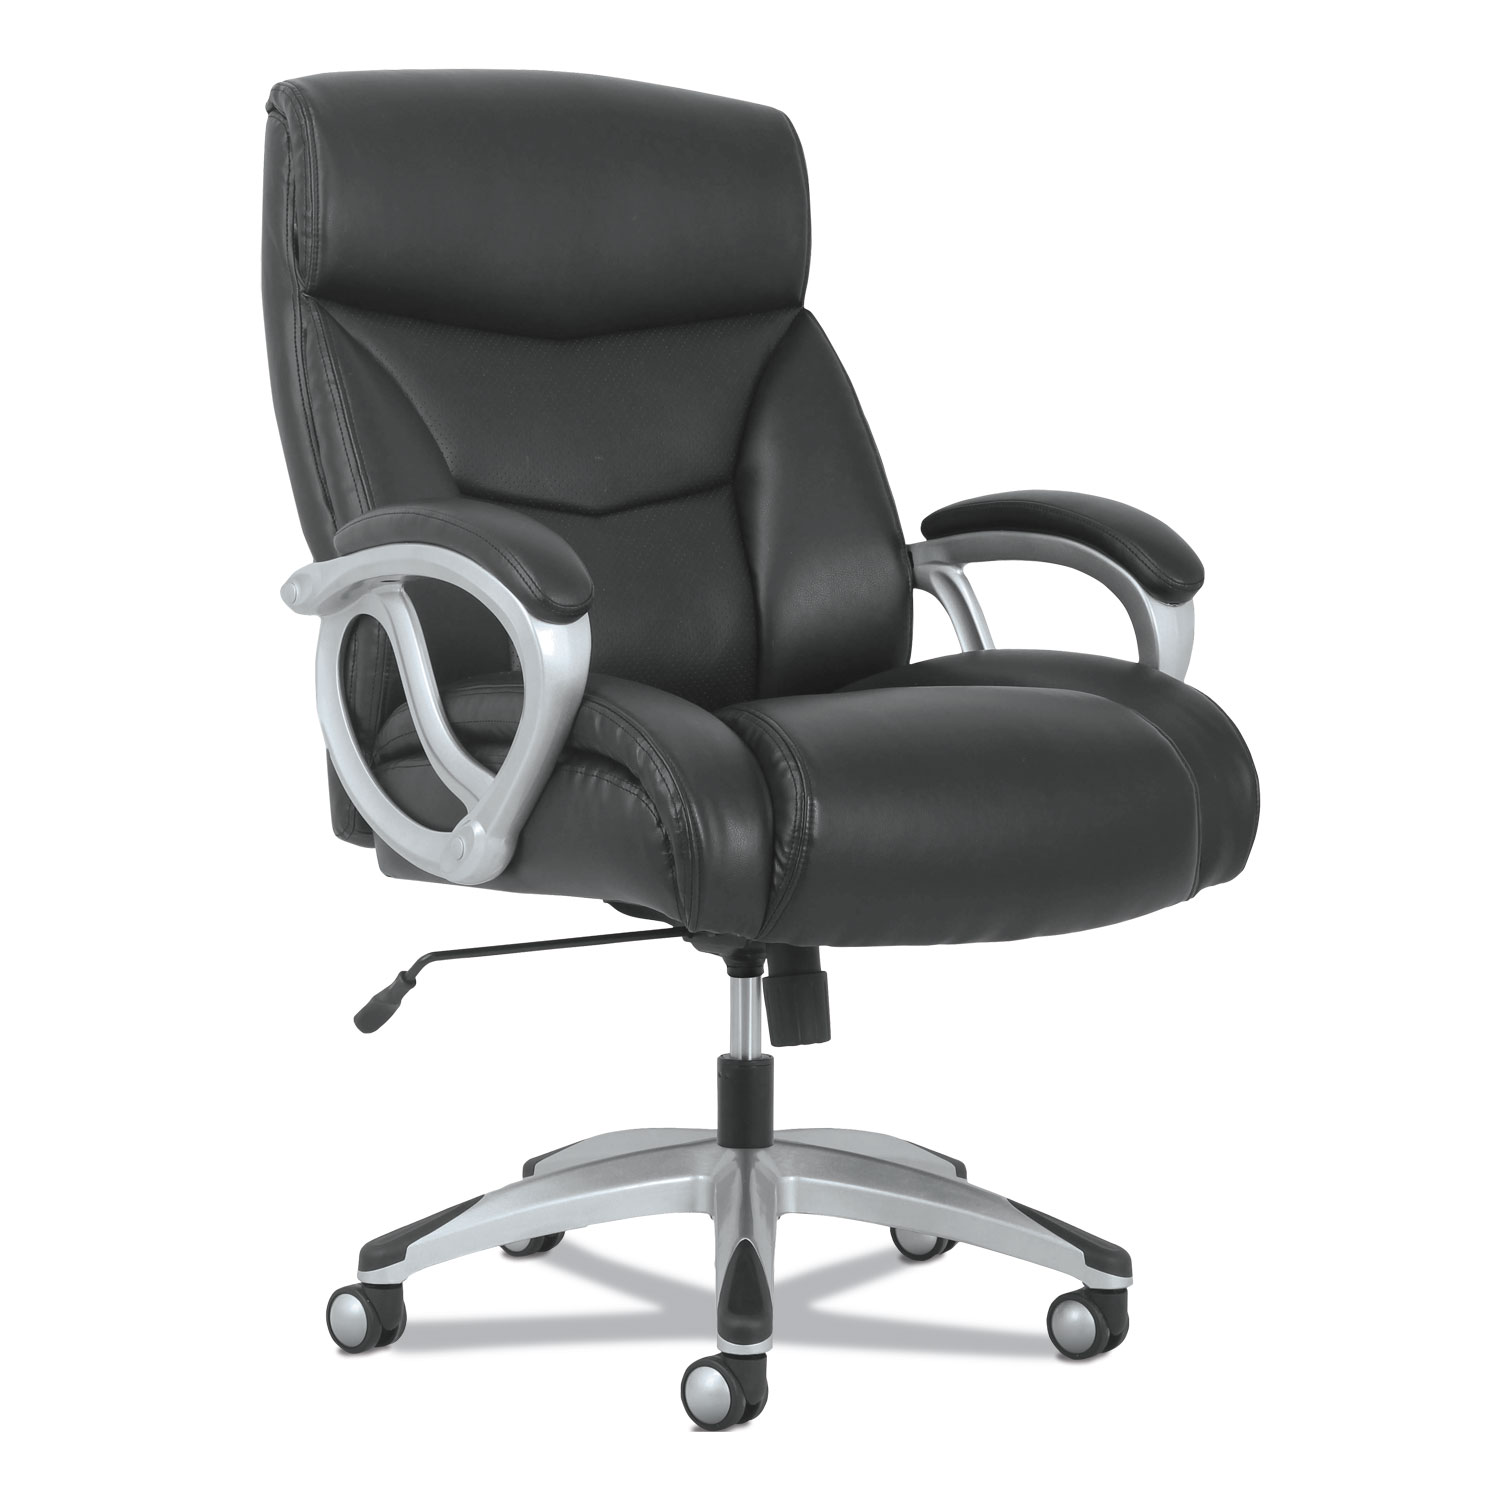  Sadie BSXVST341 3-Forty-One Big and Tall Chair, Supports up to 400 lbs., Black Seat/Black Back, Aluminum Base (BSXVST341) 